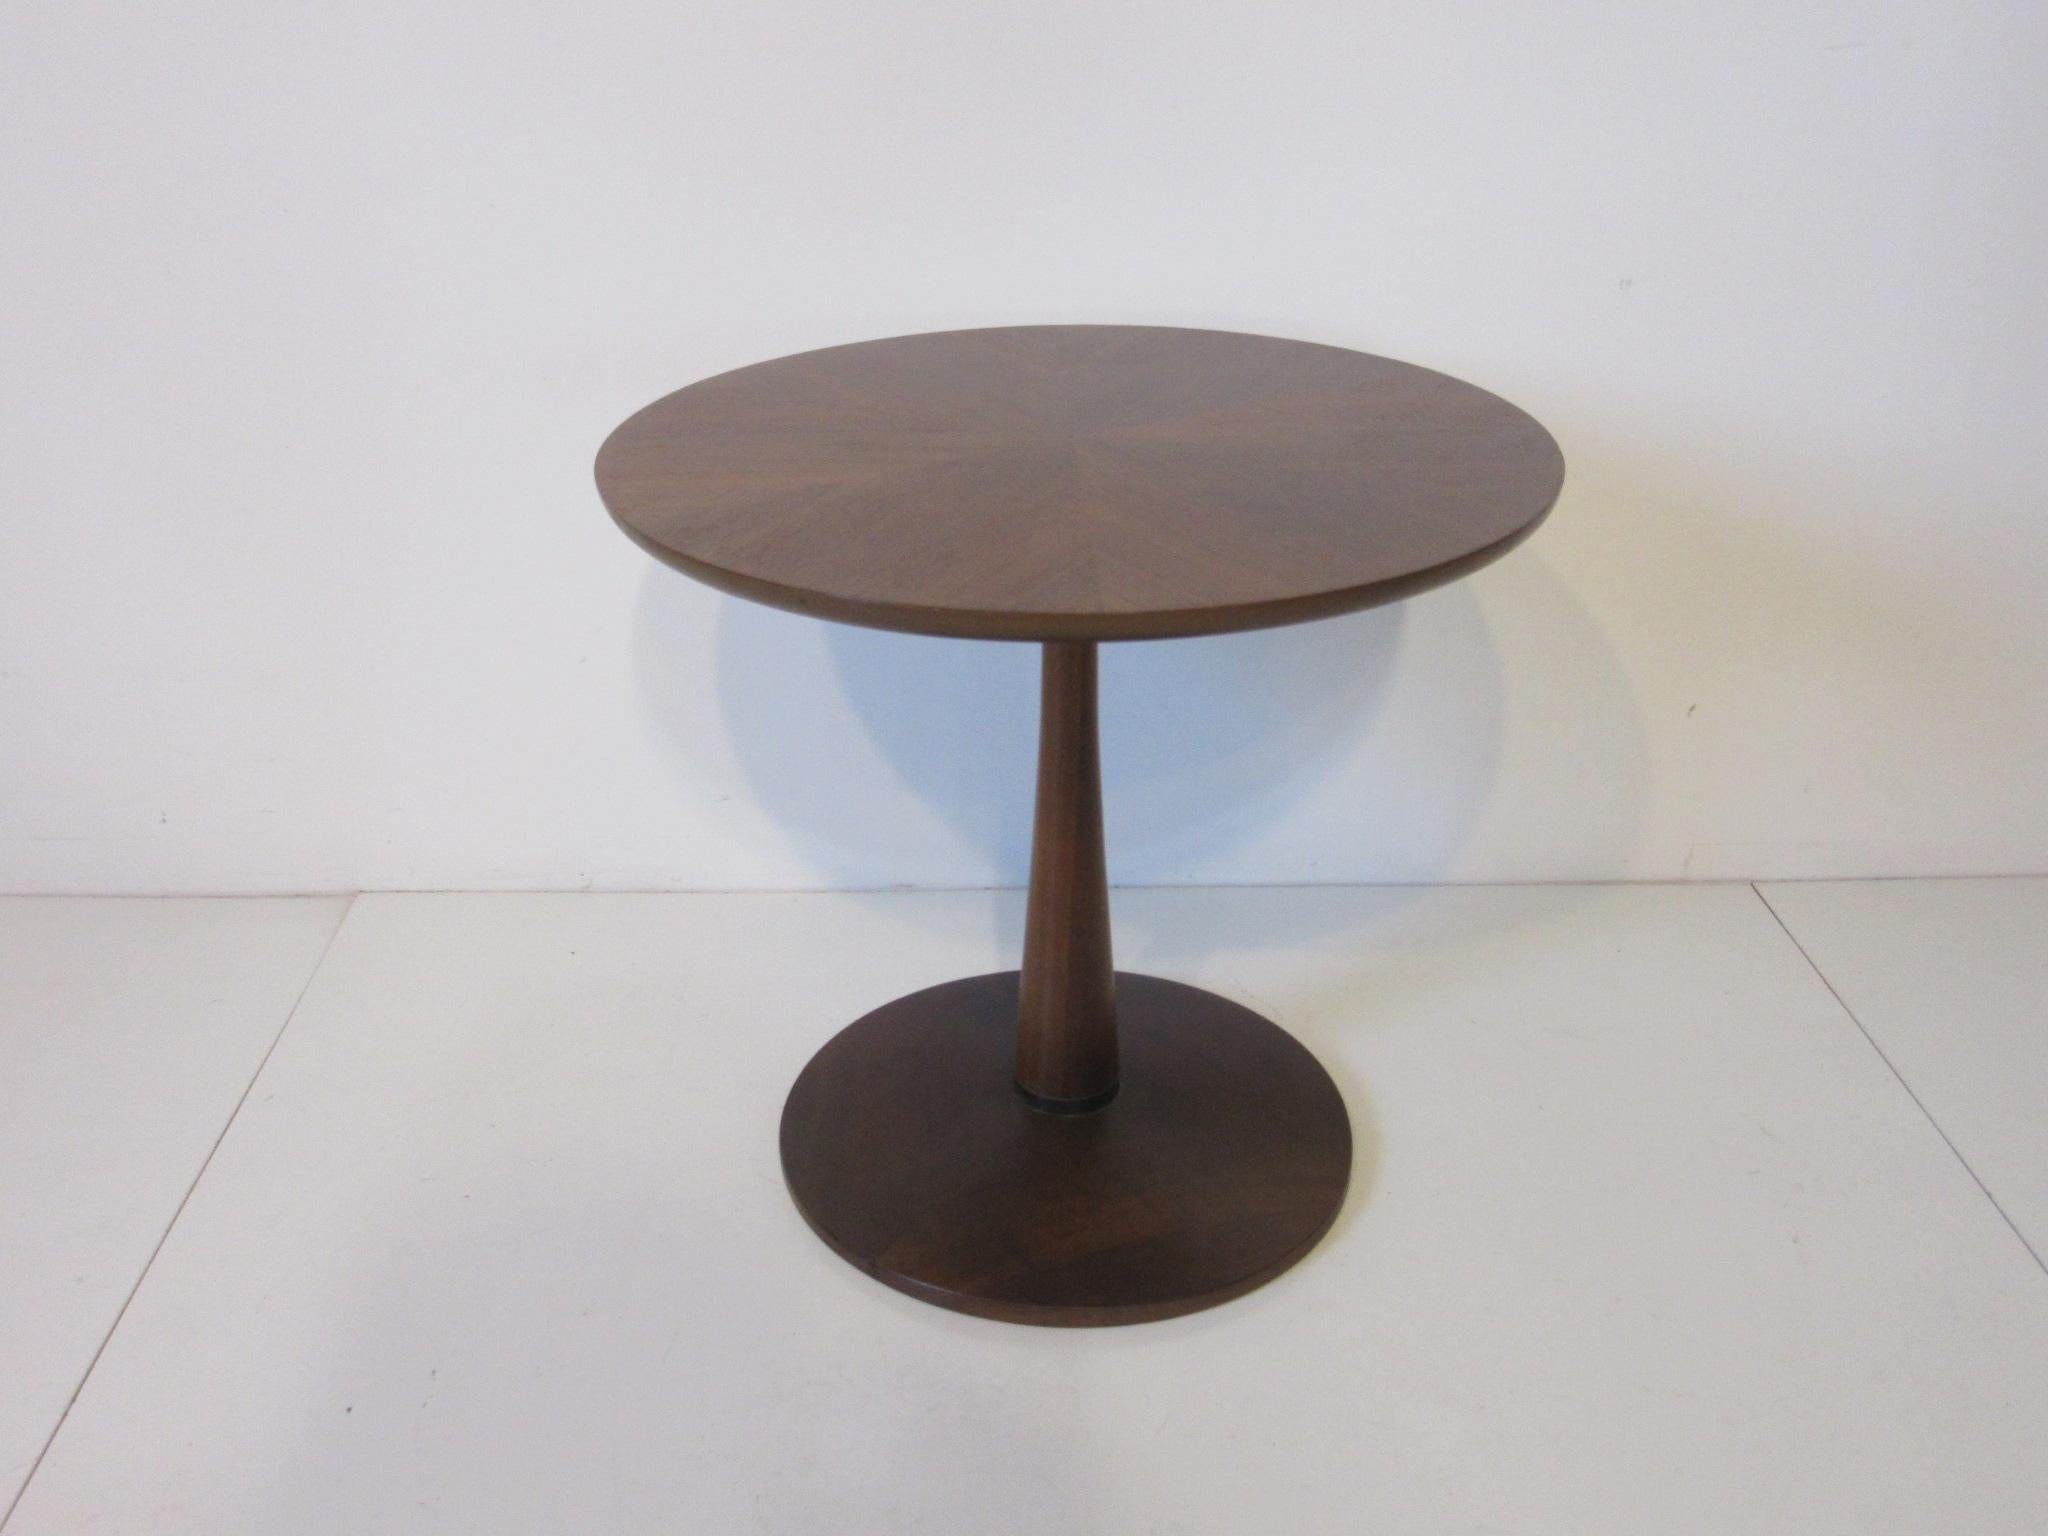 Walnut Pedestal Based Side Table by Drexel for the Declaration Collection 1